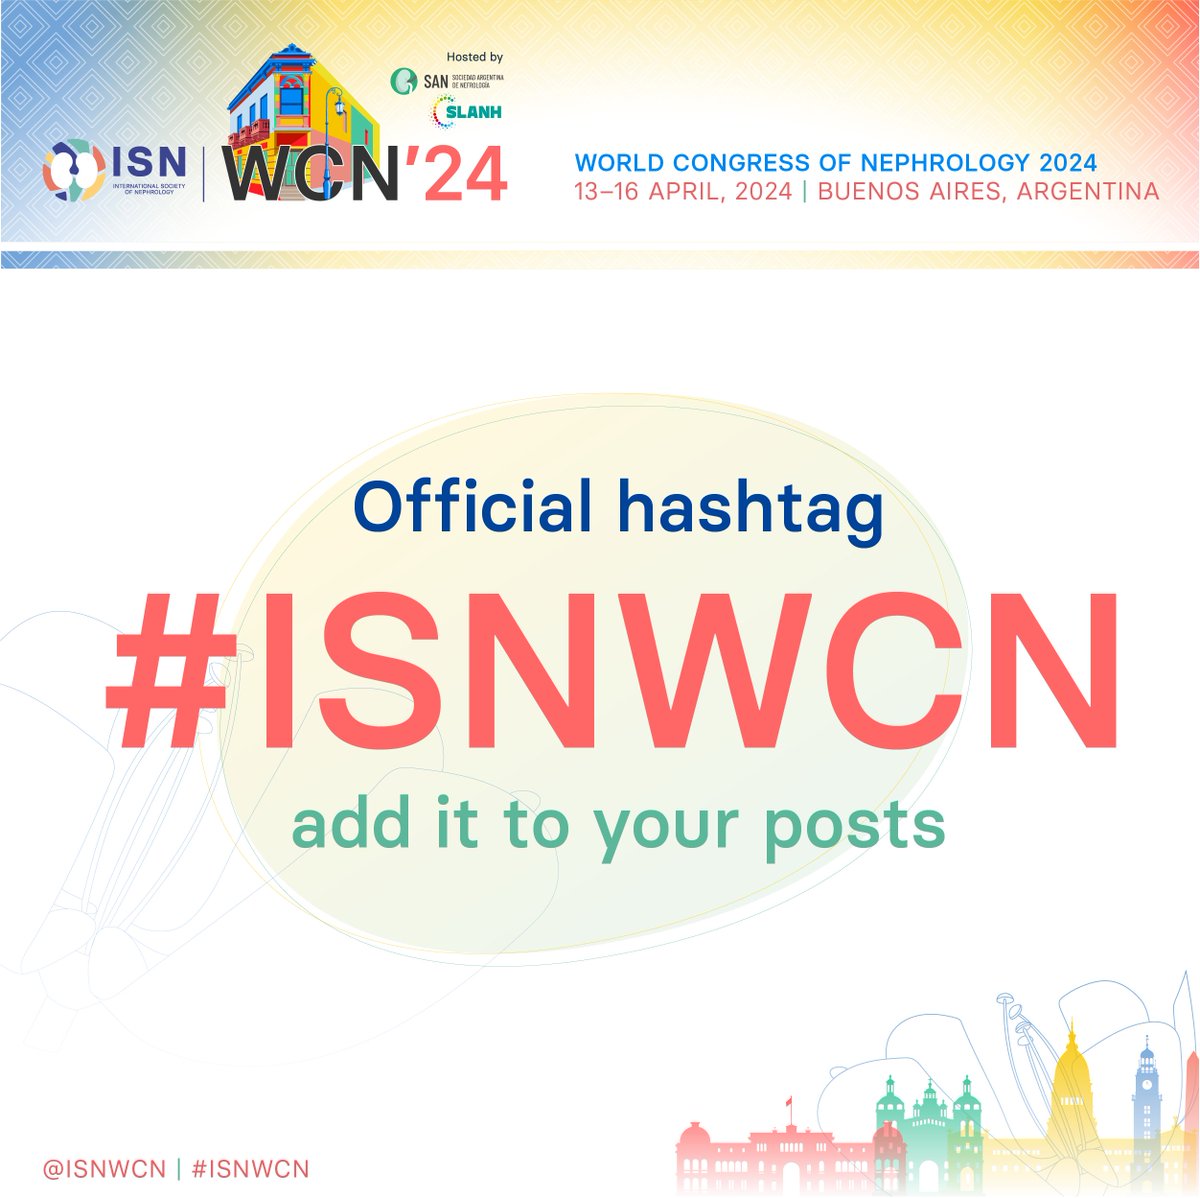 We invite you to add the hashtag ➡️#ISNWCN⬅️ in your posts, so they are featured in our social media wall.